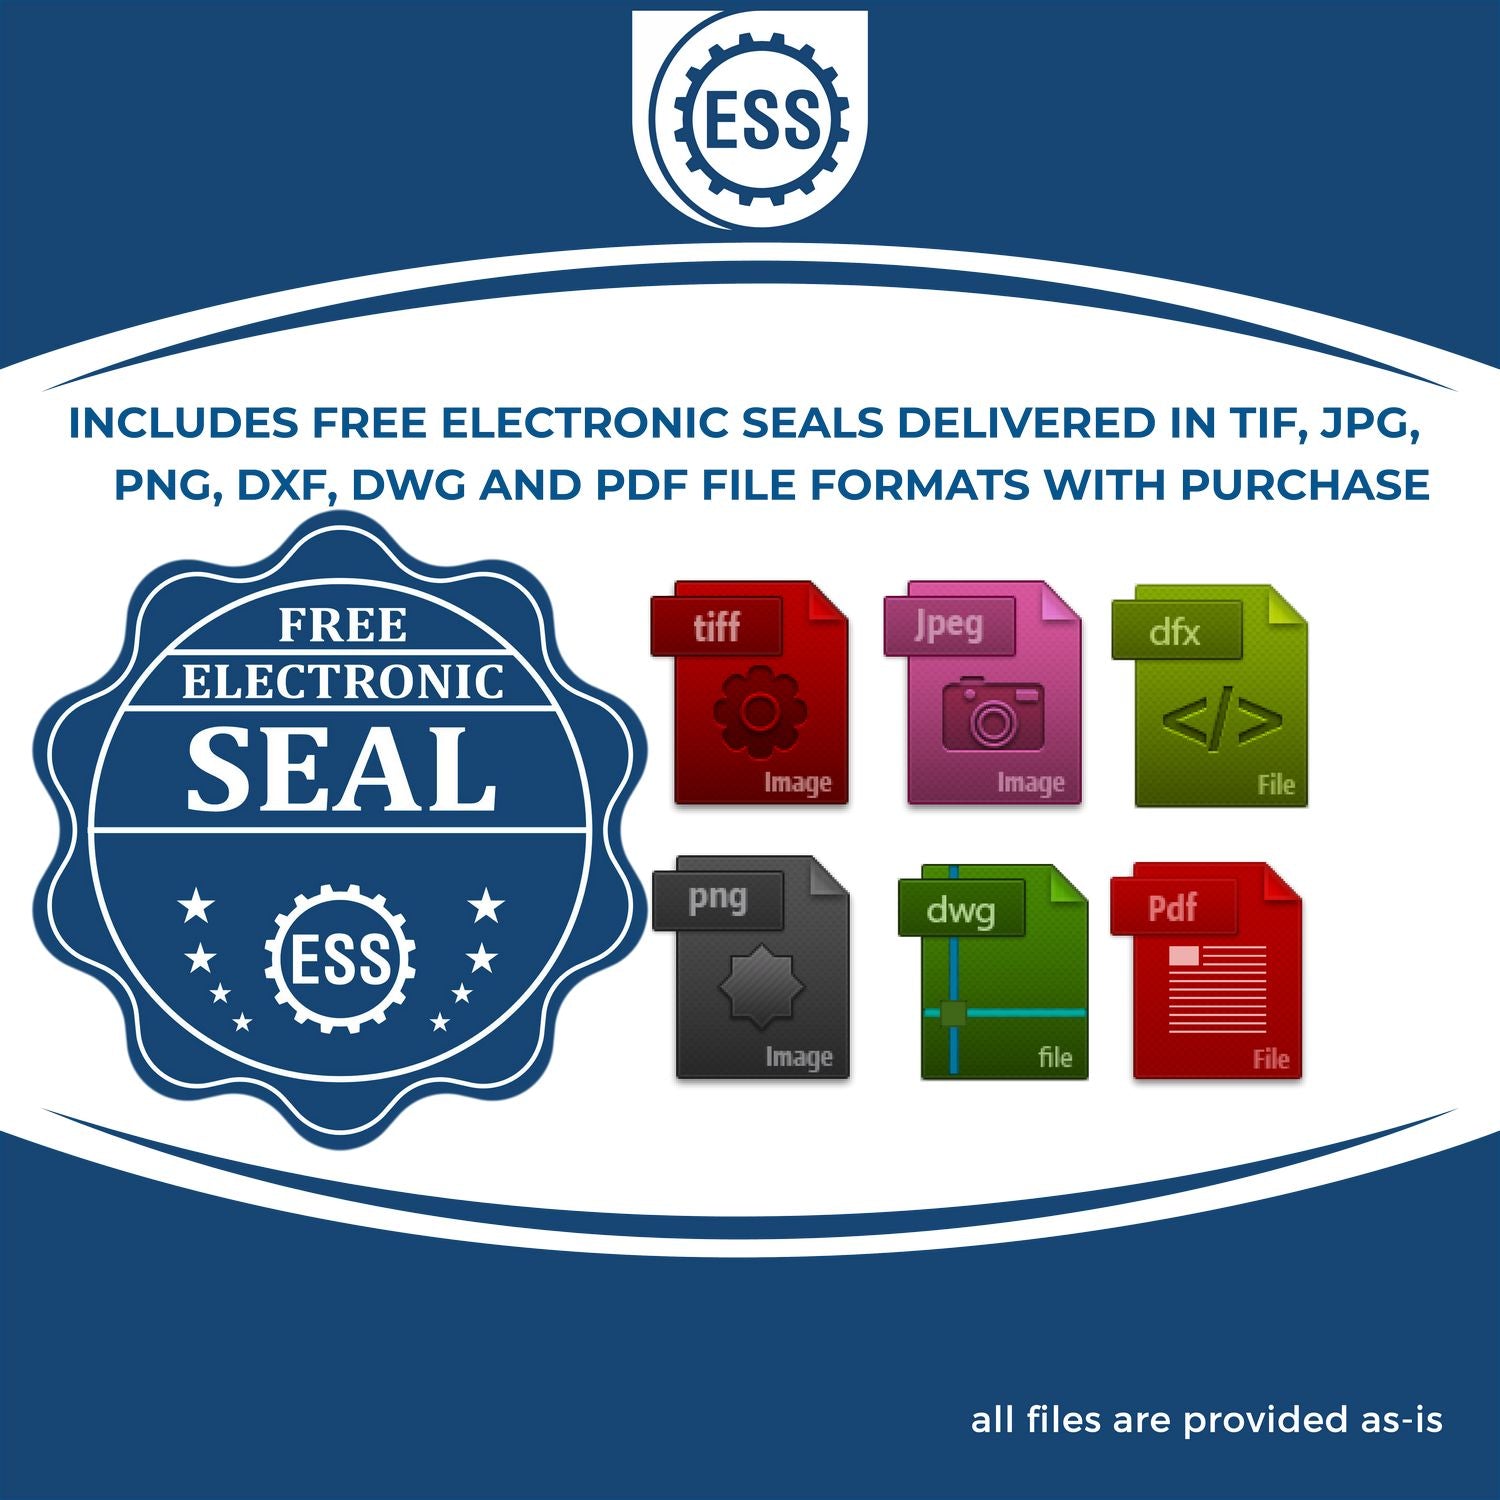 An infographic for the free electronic seal for the Soft Oregon Professional Engineer Seal illustrating the different file type icons such as DXF, DWG, TIF, JPG and PNG.